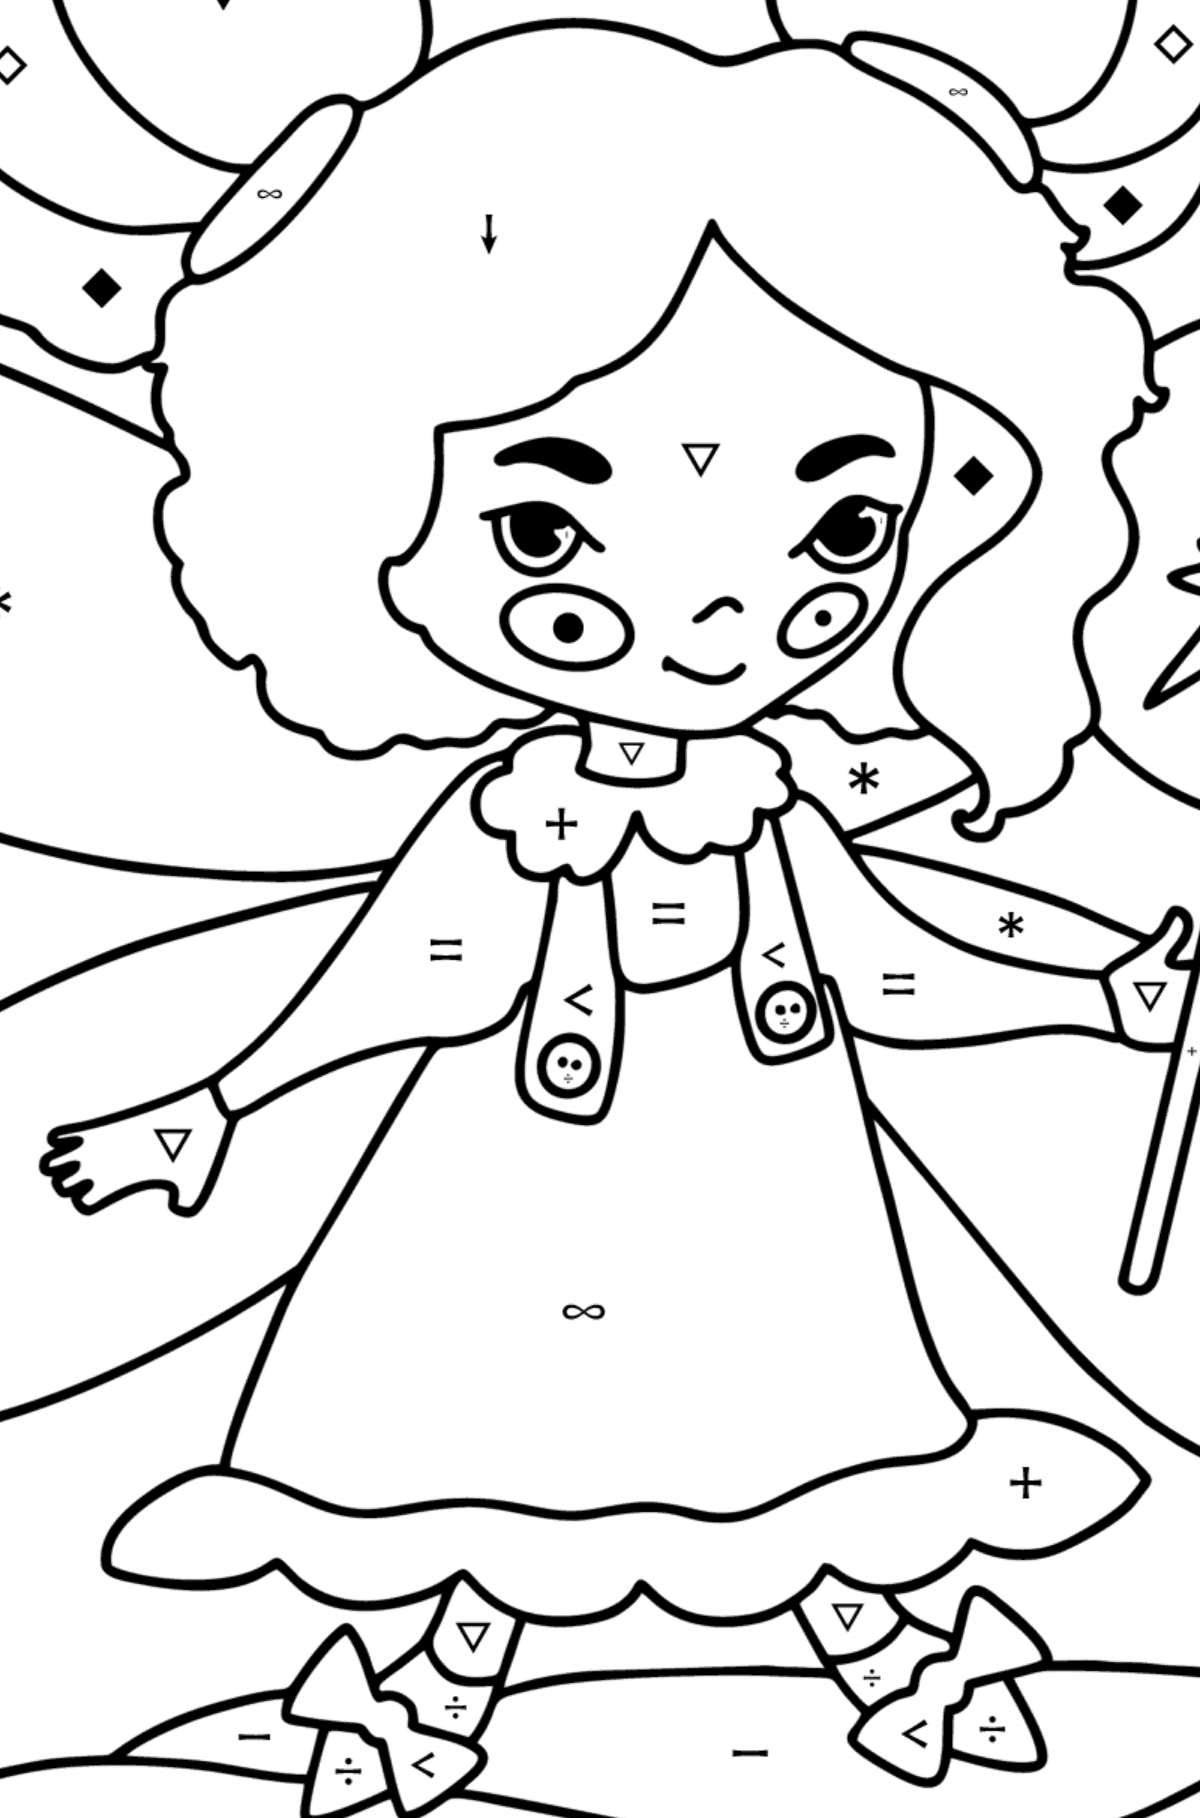 Fairy with a magic wand coloring page - Coloring by Symbols for Kids